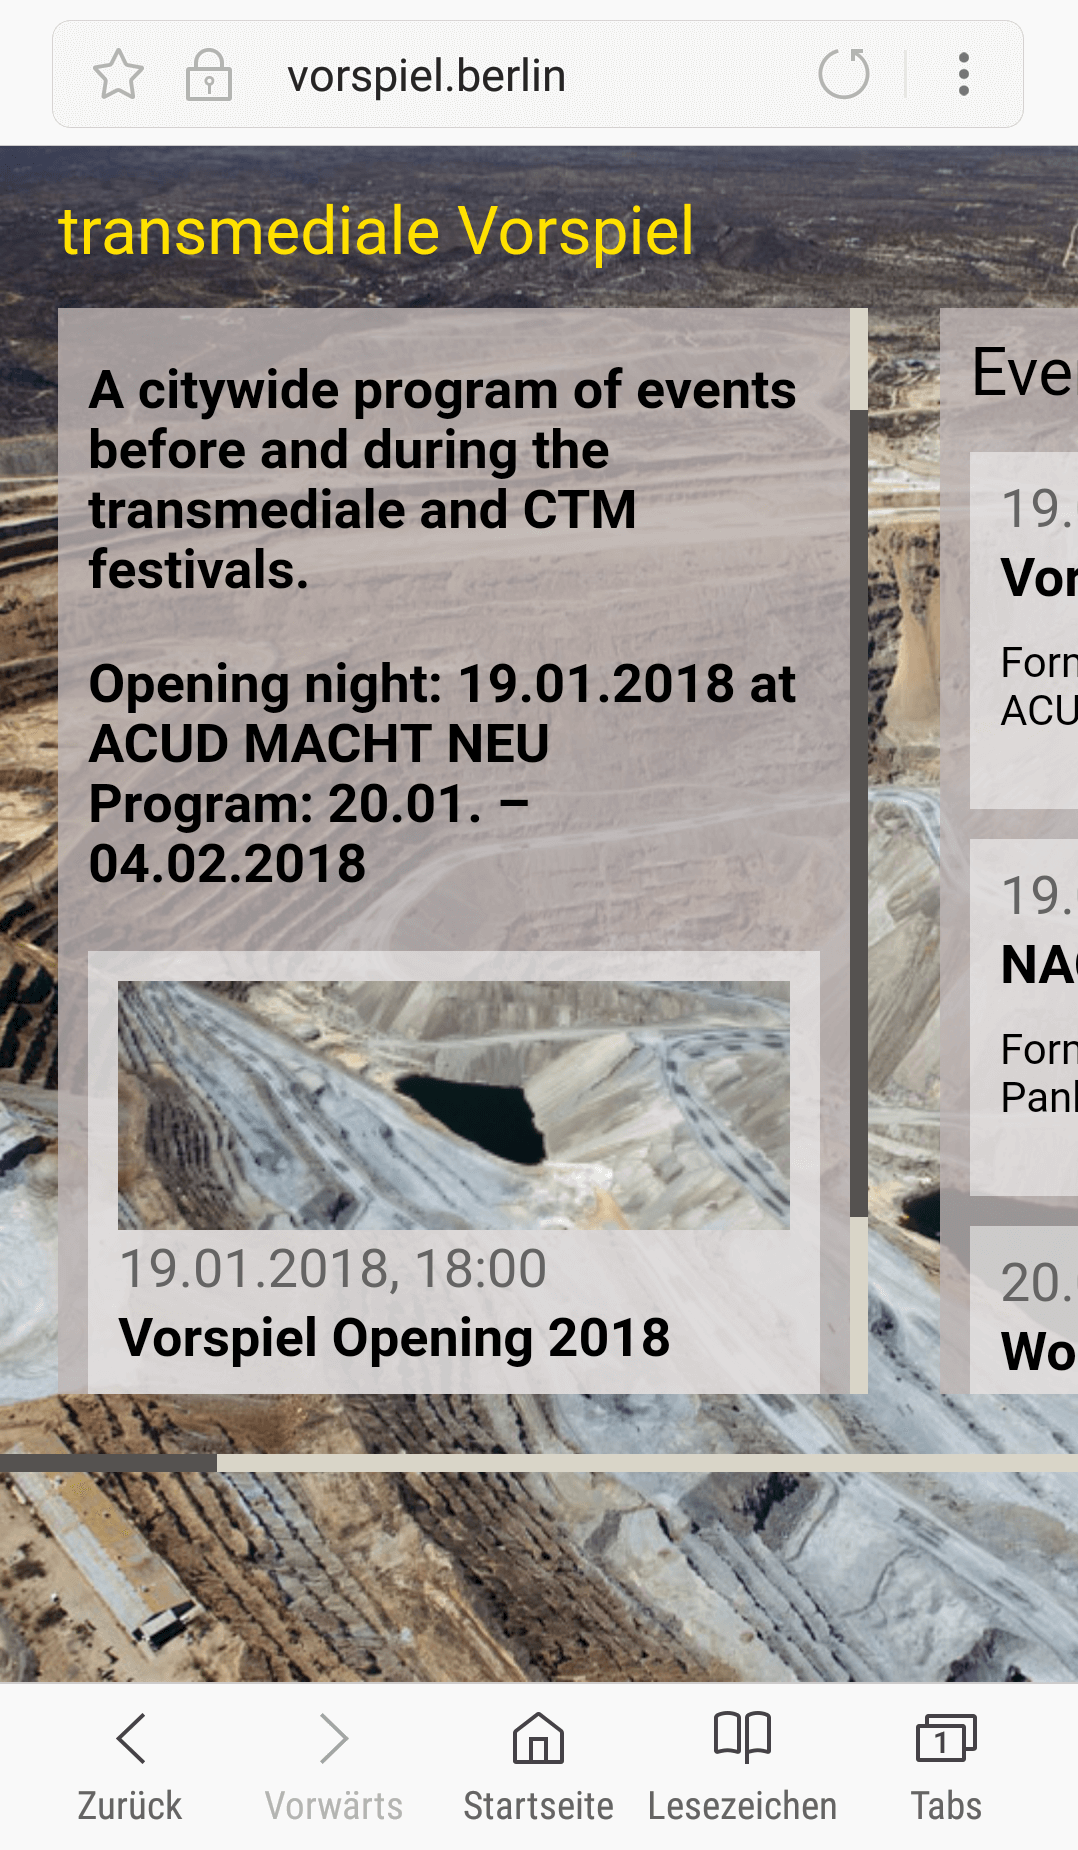 Vorspiel 2018 – A citywide program of events before and during the transmediale and CTM festivals.